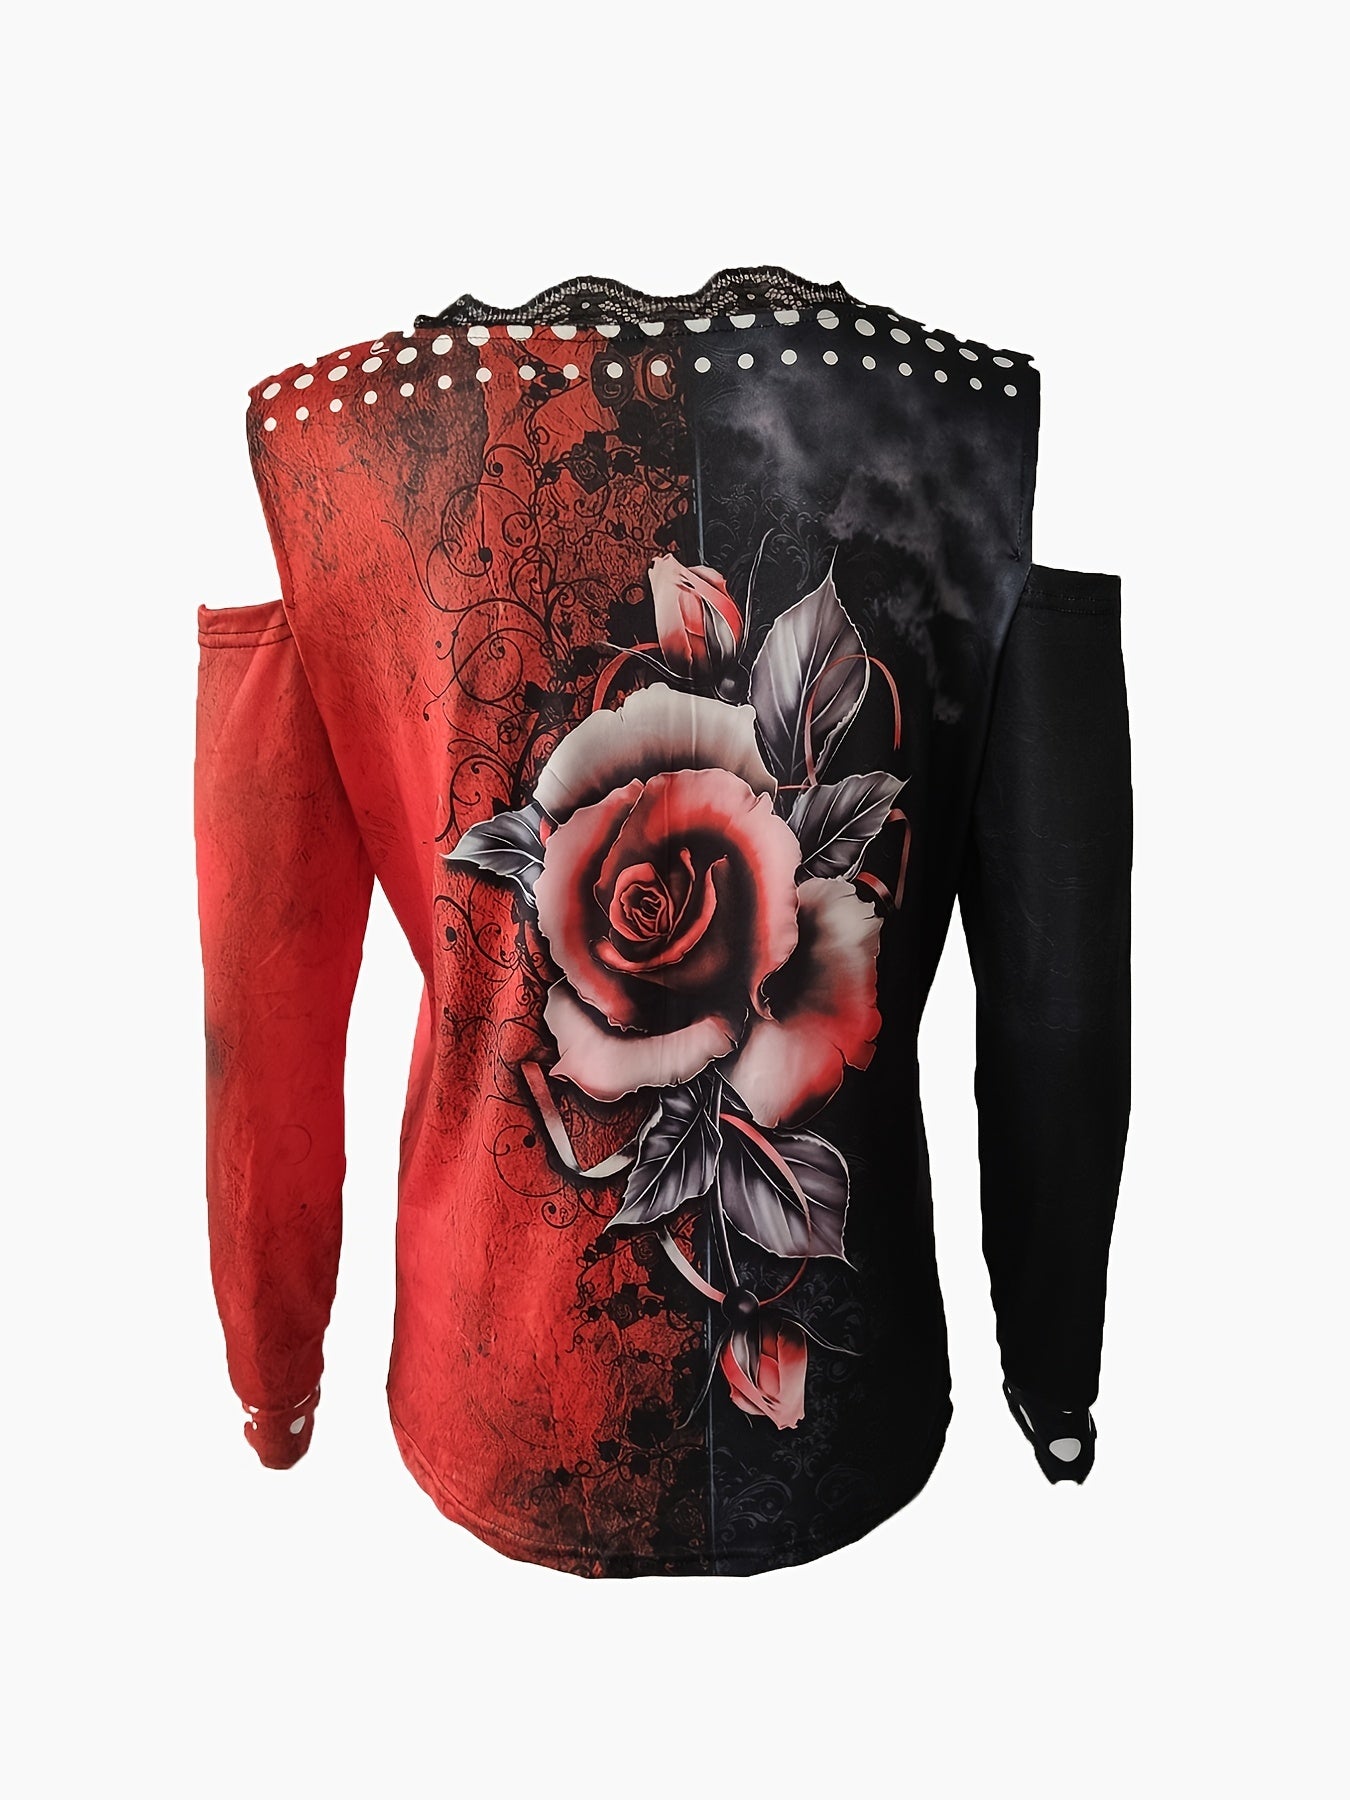 Floral Print Lace Decor V Neck T-shirt, Sexy  Off Shoulder Loose Long Sleeve T-Shirts Tops, Women's Clothing